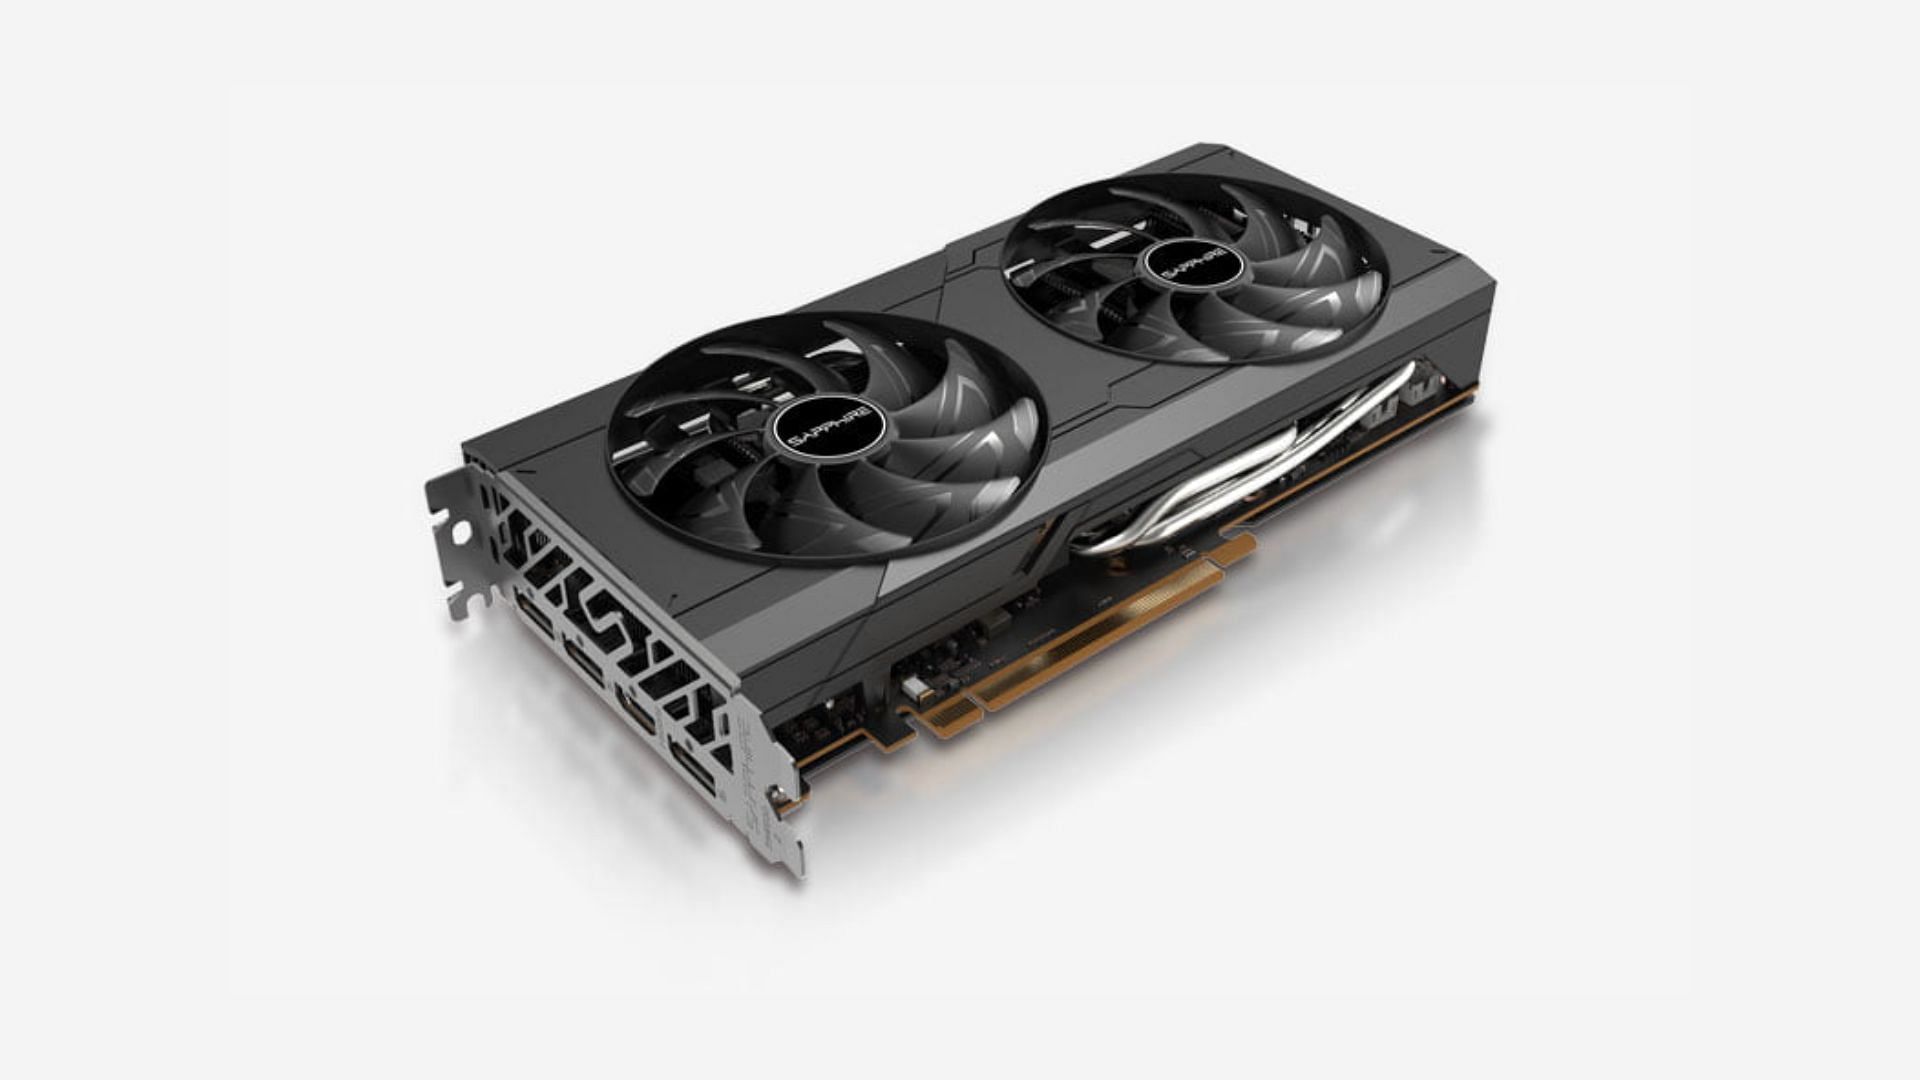 The 10GB RX 6700 (Non-XT) - The Best GPU No One Is Talking About 